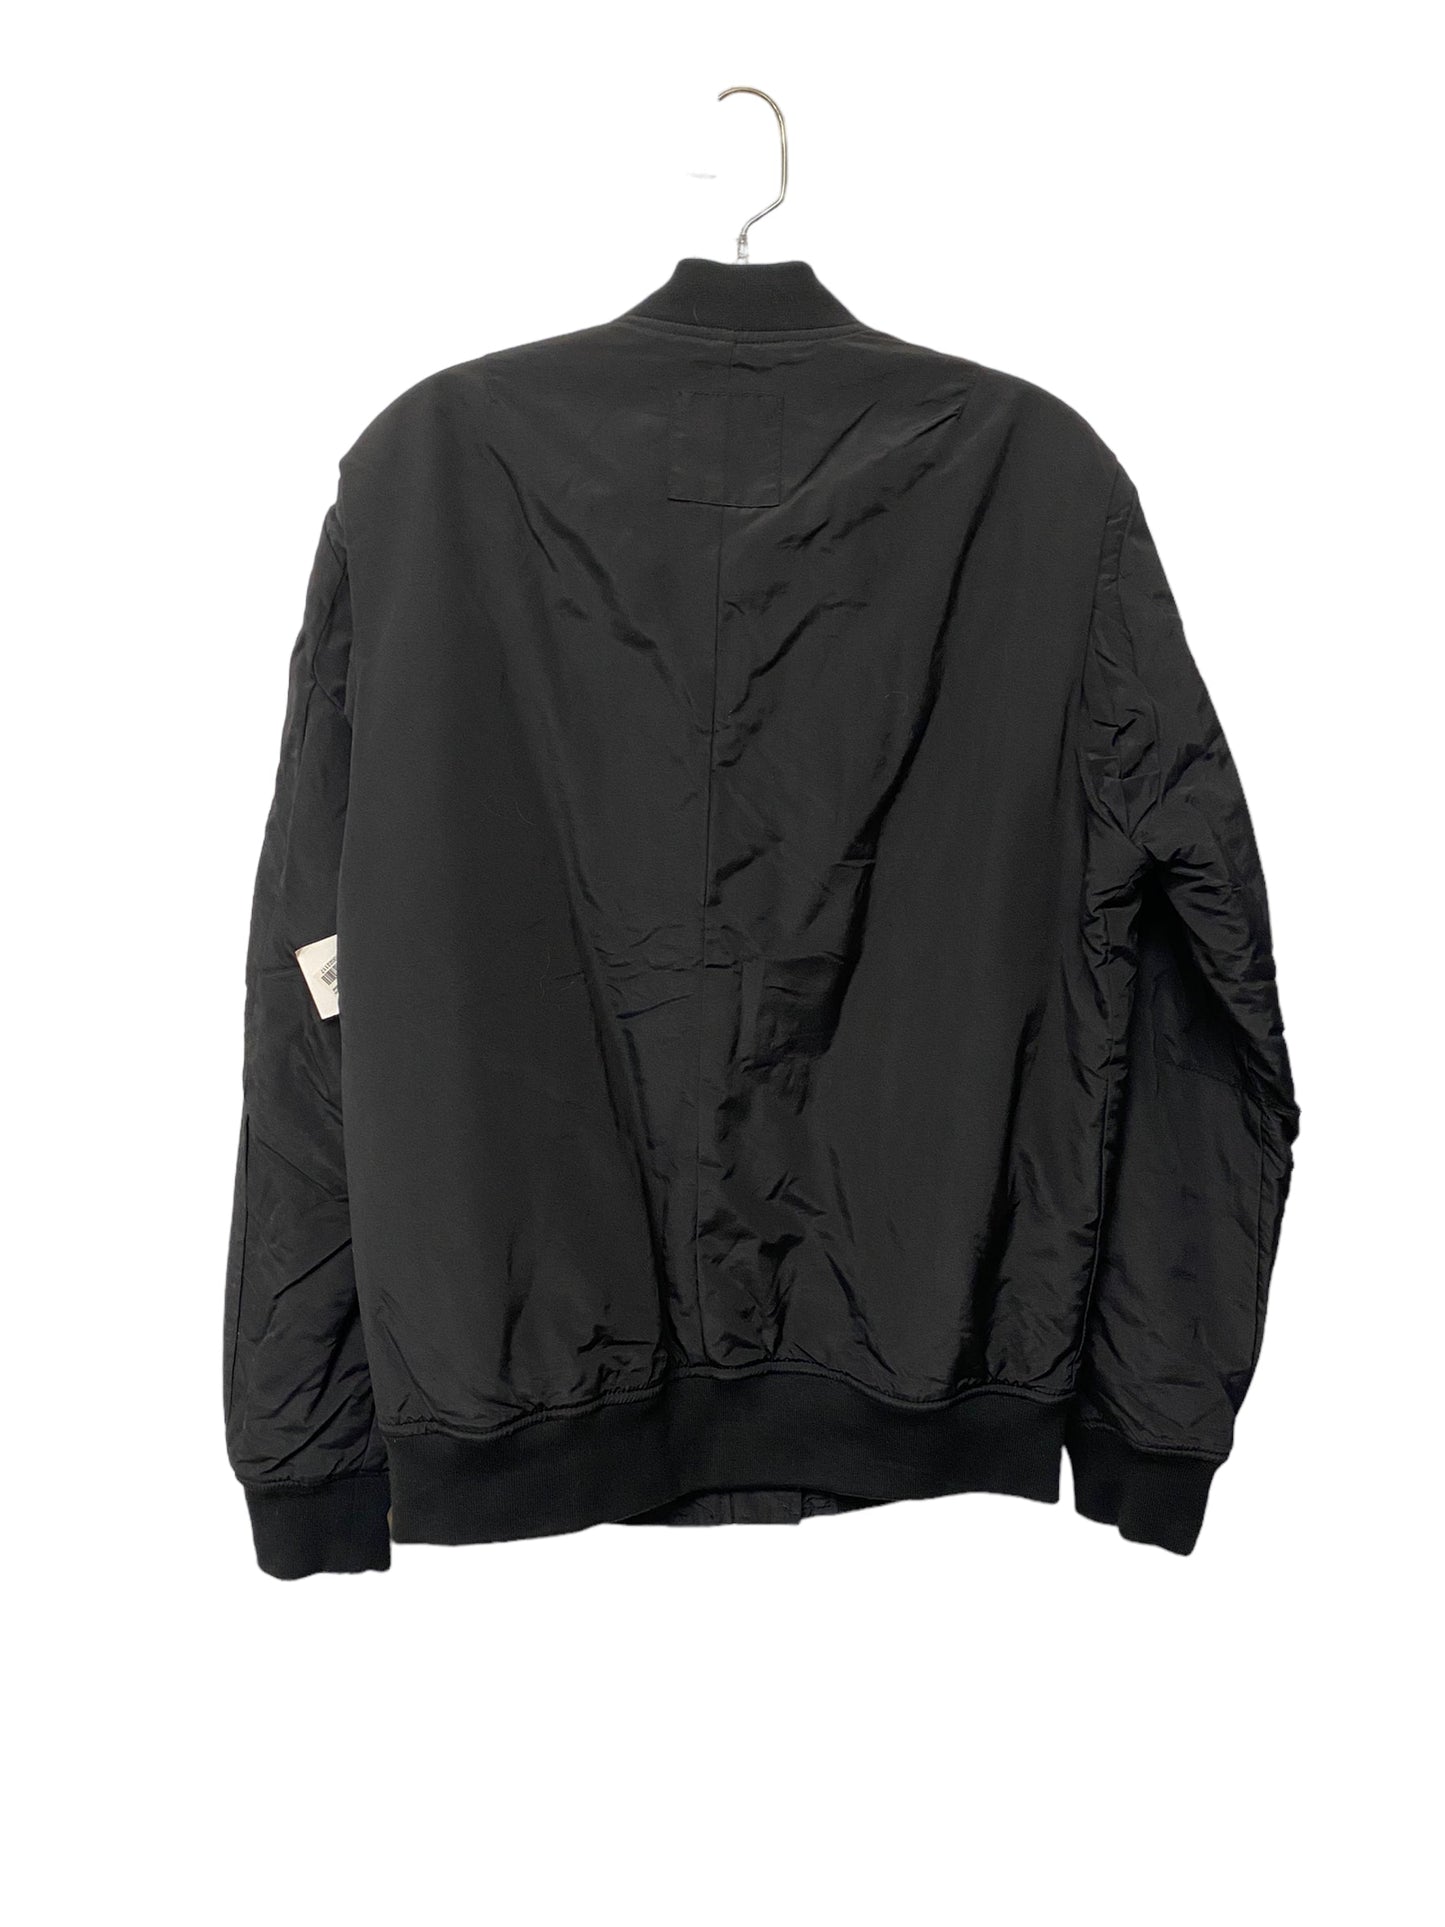 Jacket Other By Blanknyc  Size: M